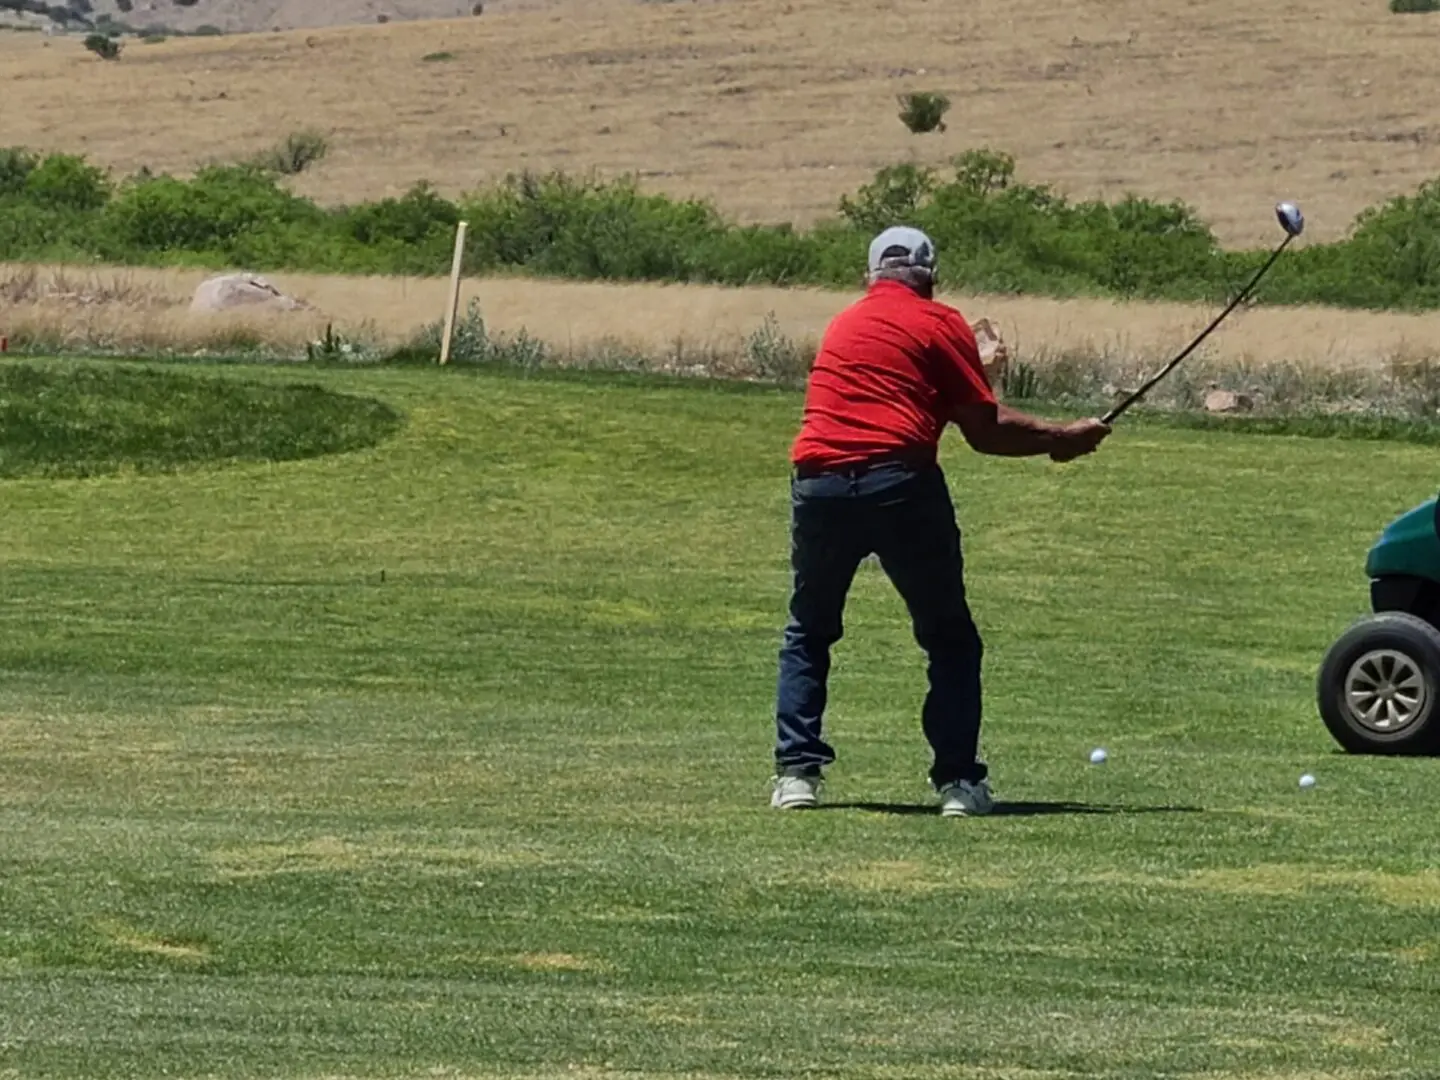 A man in red shirt playing golf on green.